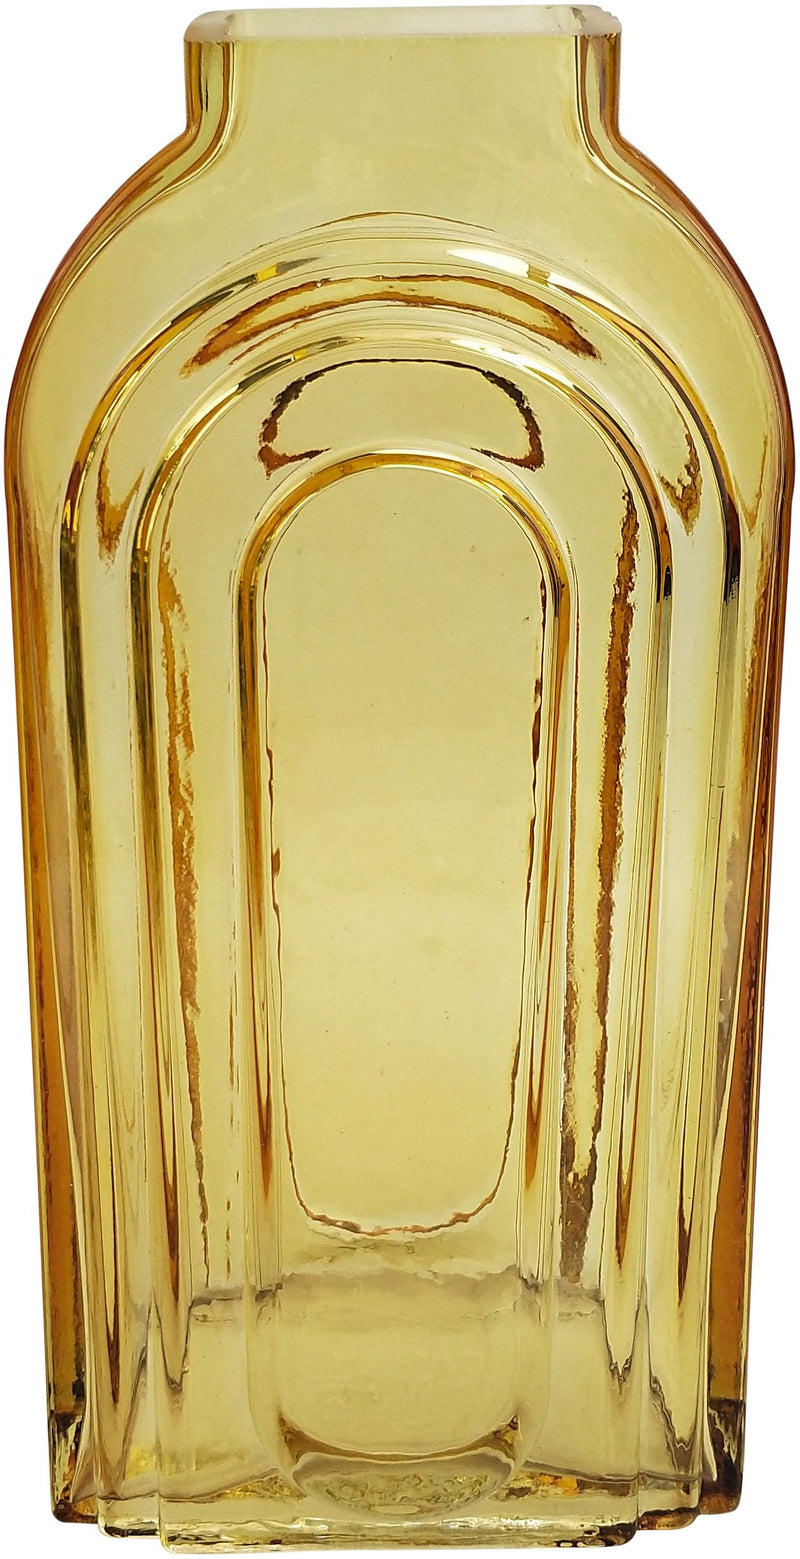 Heavy Glass Tommy Deco vase - 2 colours